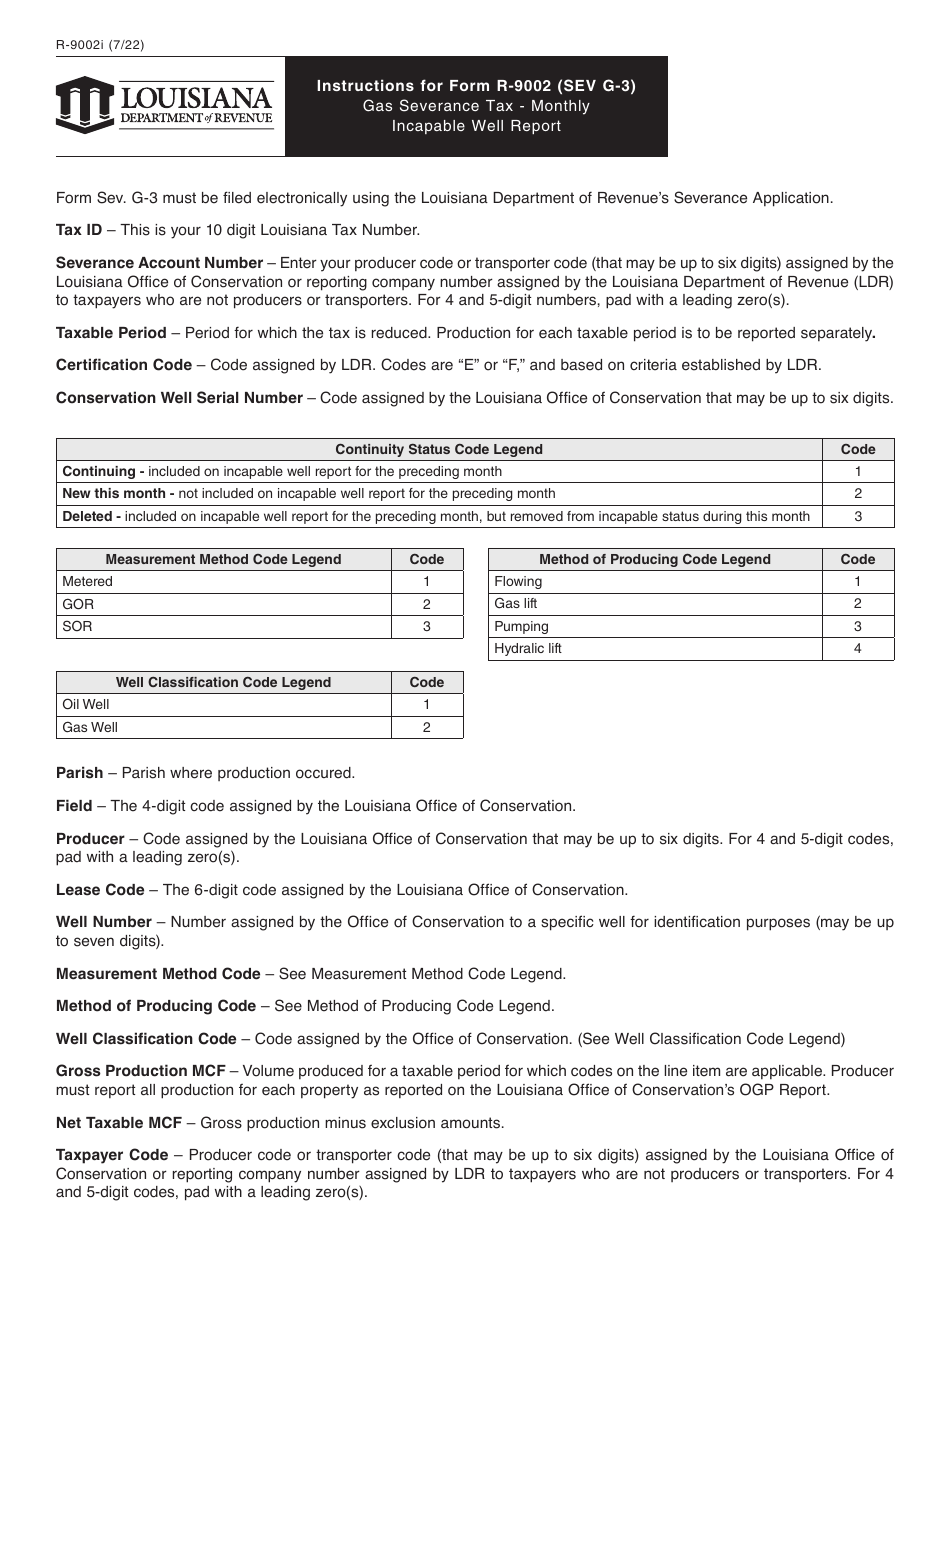 Instructions for Form R-9002, SEV G-3 Gas Severance Tax - Monthly Incapable Well Report - Louisiana, Page 1